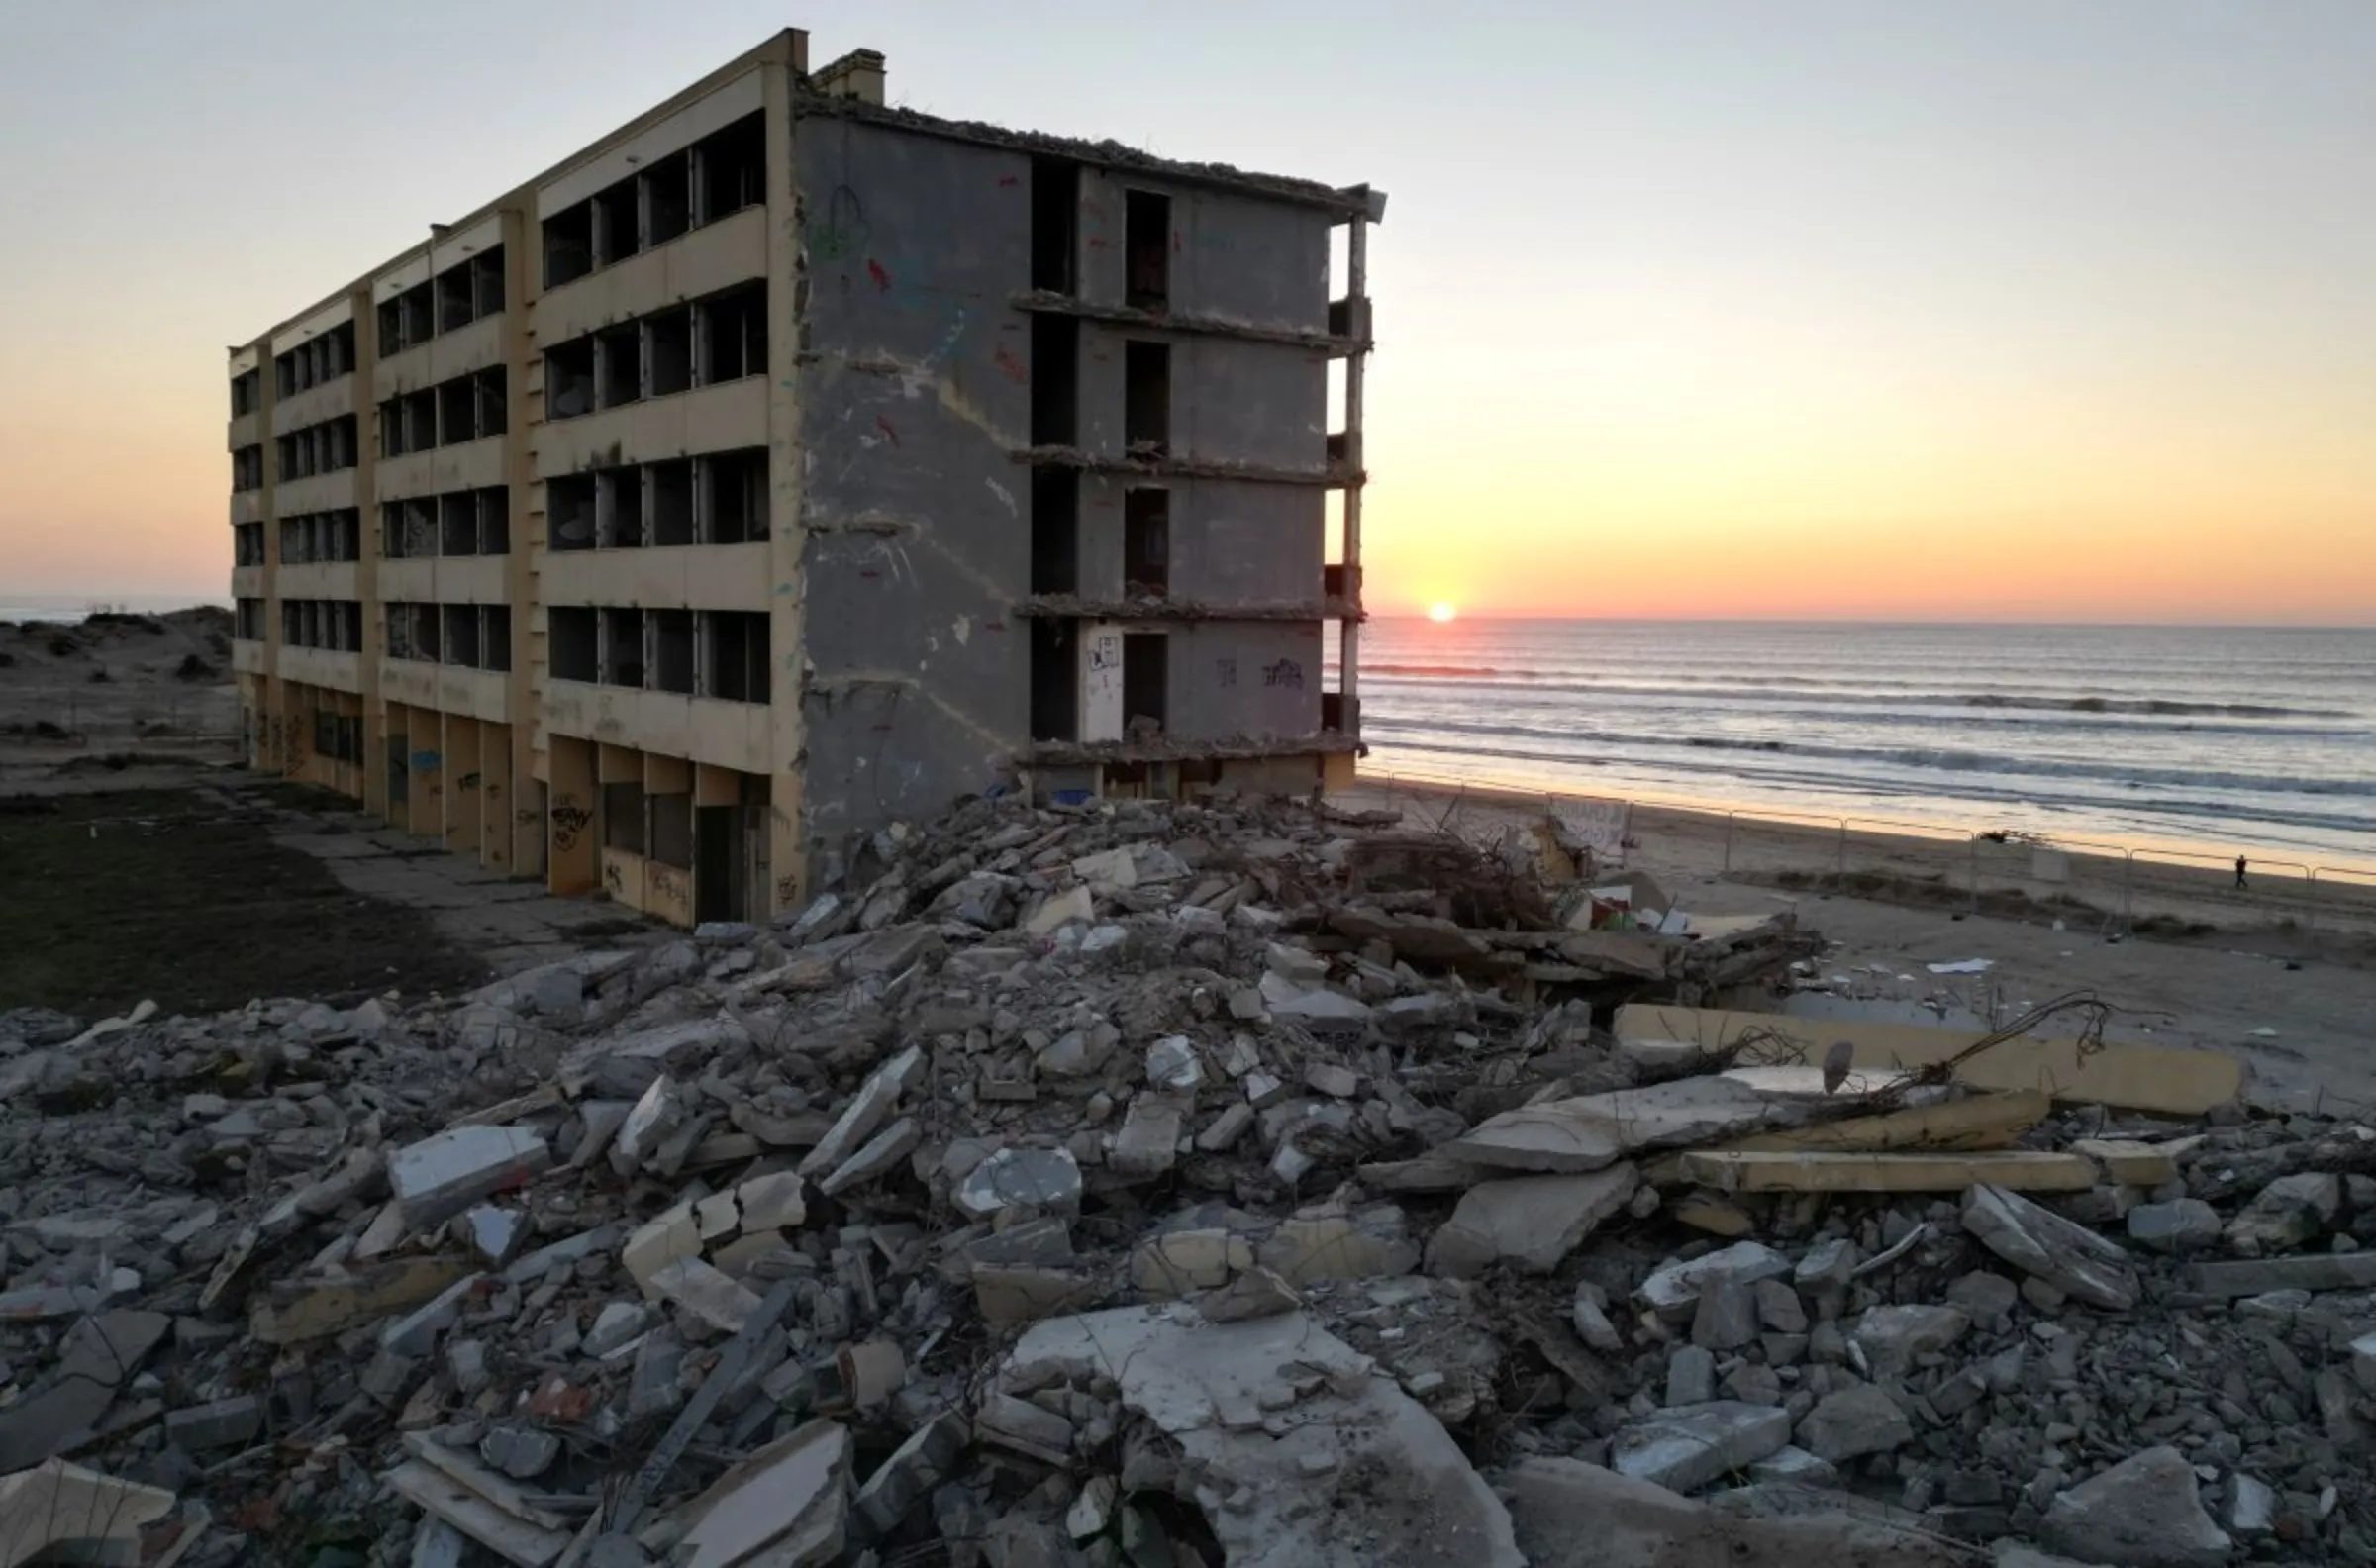 A view shows the Signal building, a seaside block of flats which had to be evacuated in 2014 due to erosion on the Atlantic Ocean coast, during its demolition in Soulac-sur-Mer, France, February 8, 2023. REUTERS/Stephane Mahe